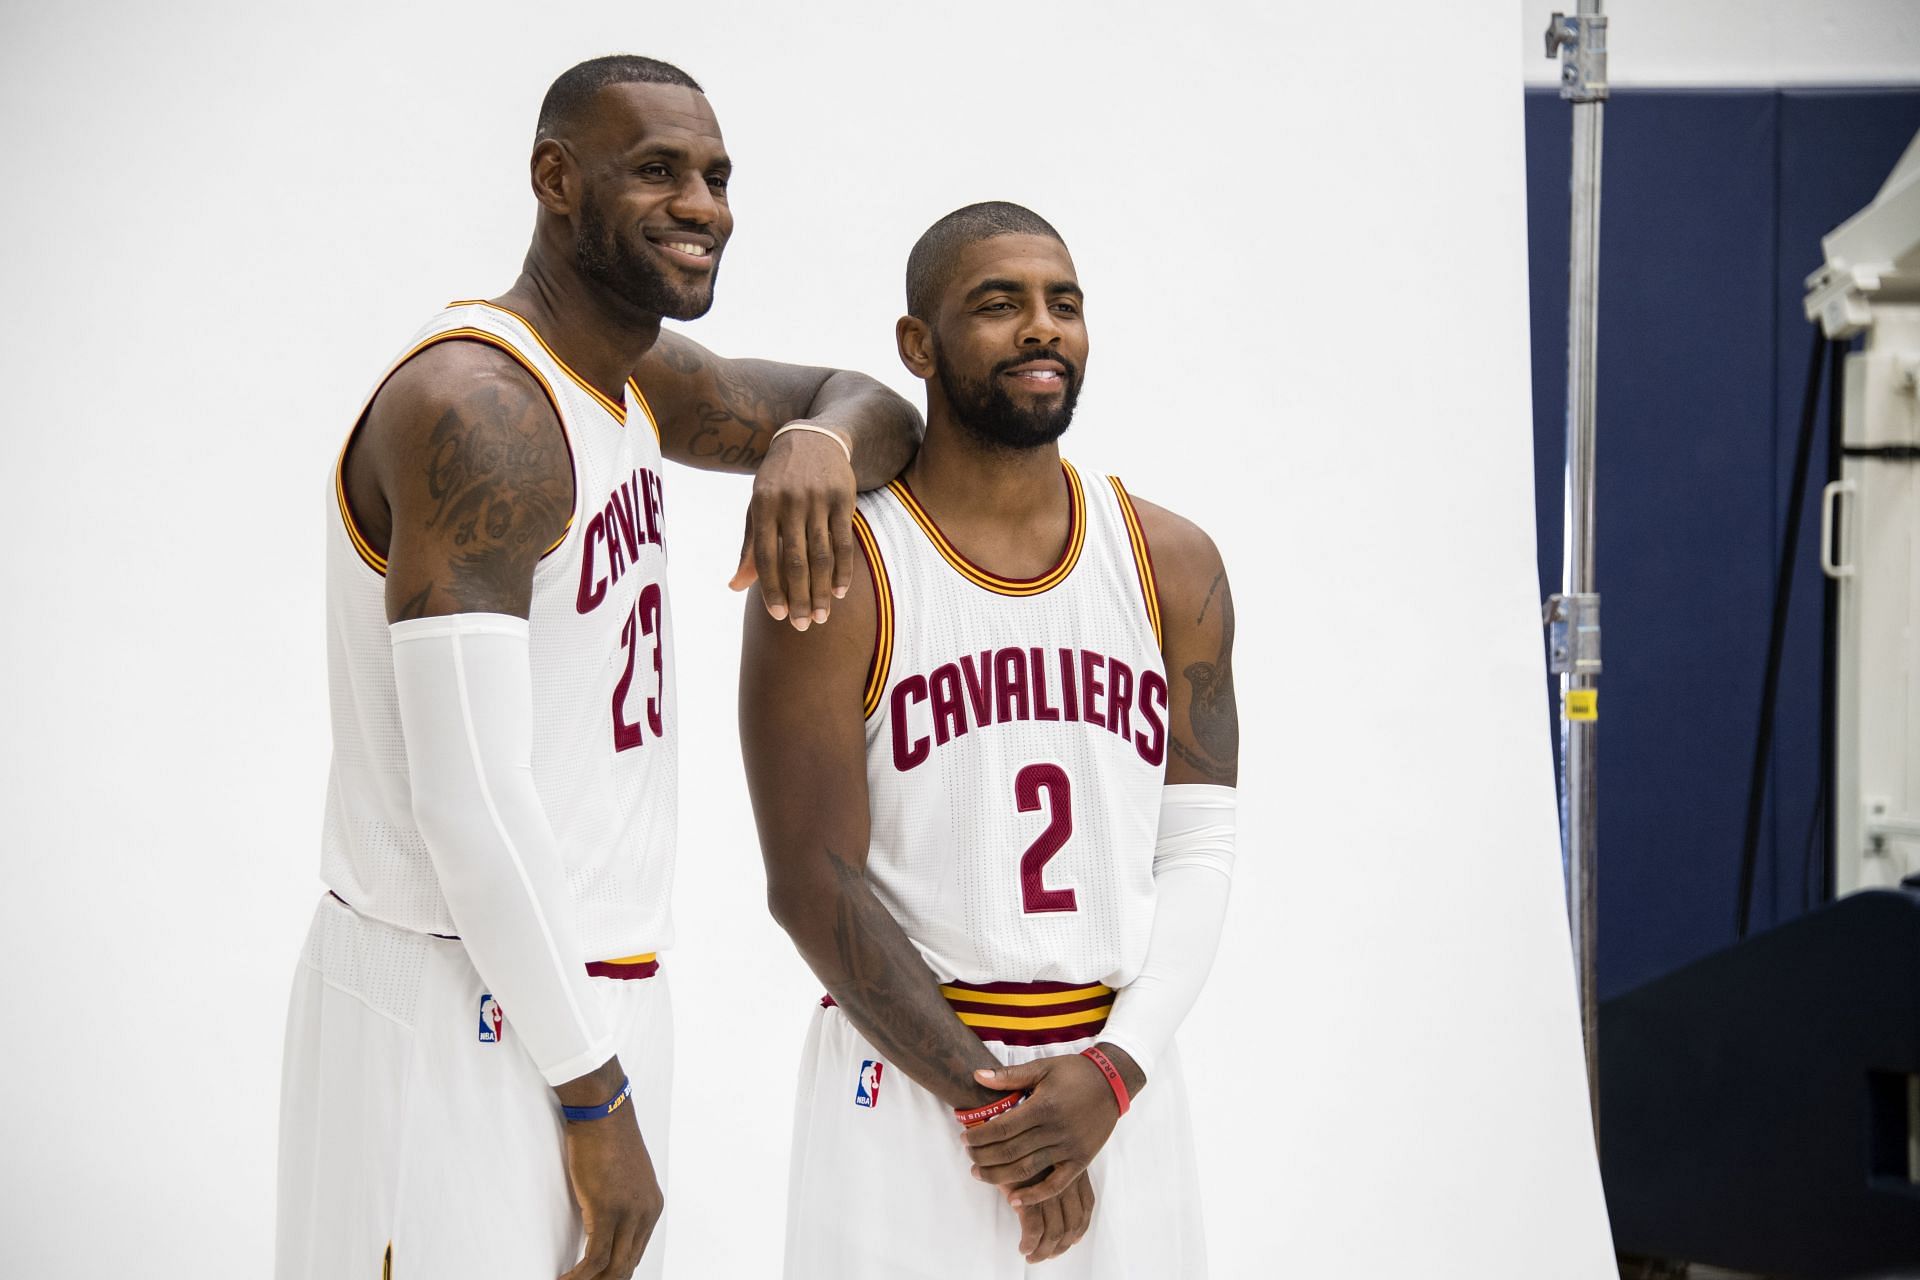 Cleveland Cavaliers teammates LeBron James and Kyrie Irving could soon reunite in Los Angeles.